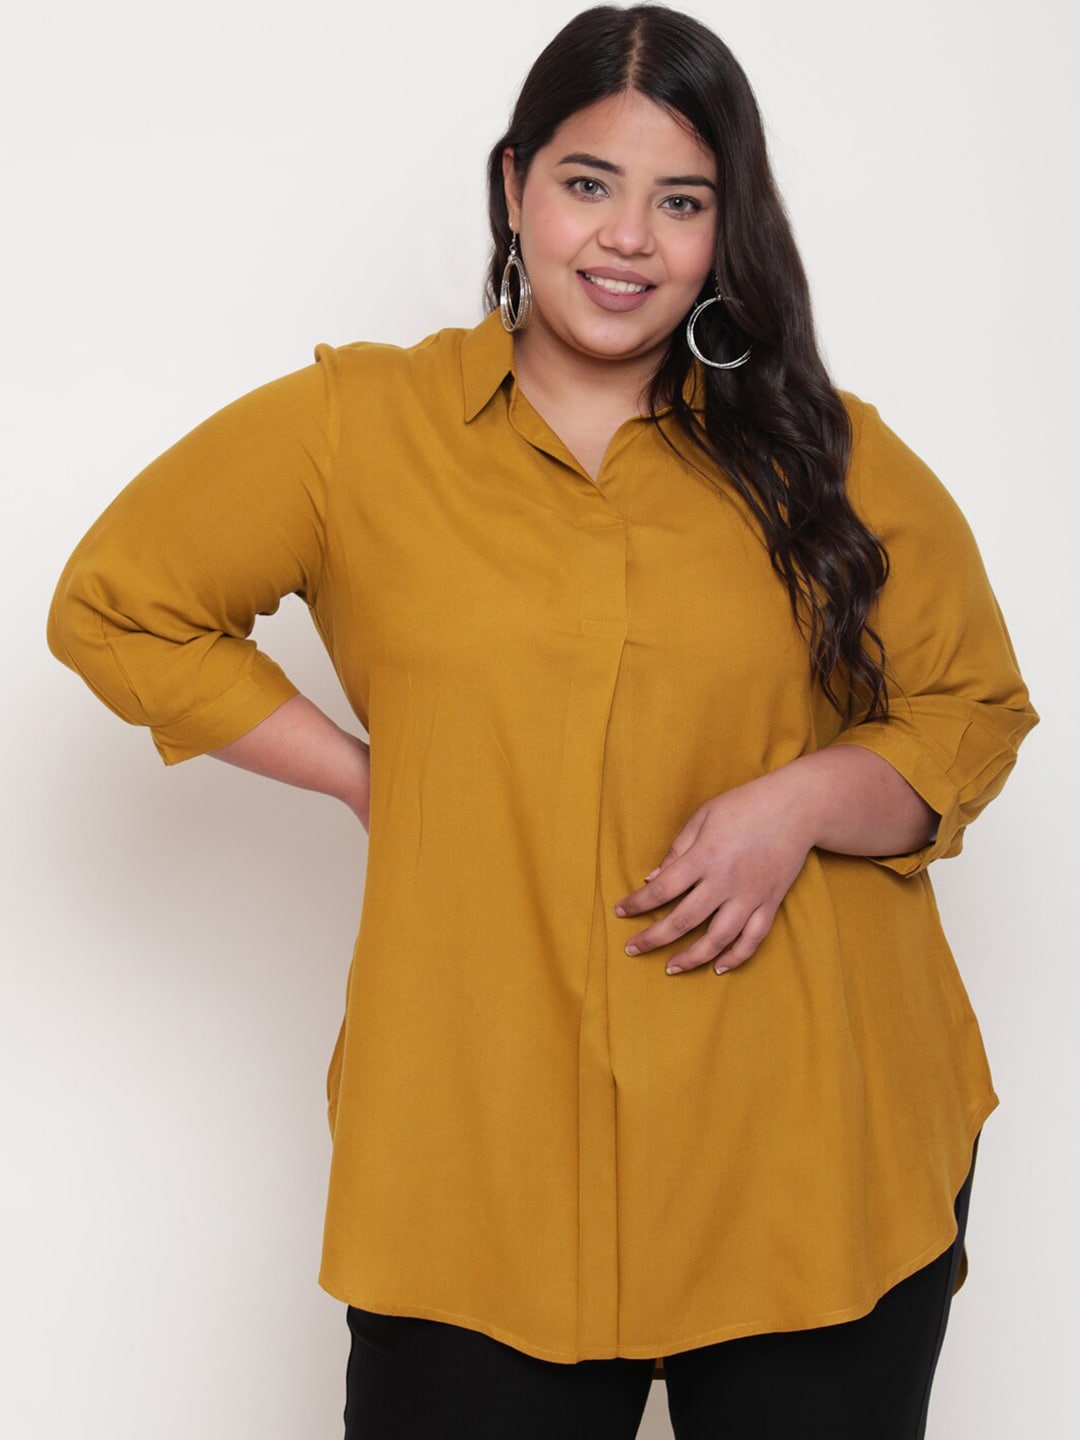 Amydus Cuffed Sleeves Shirt Style Top Price in India